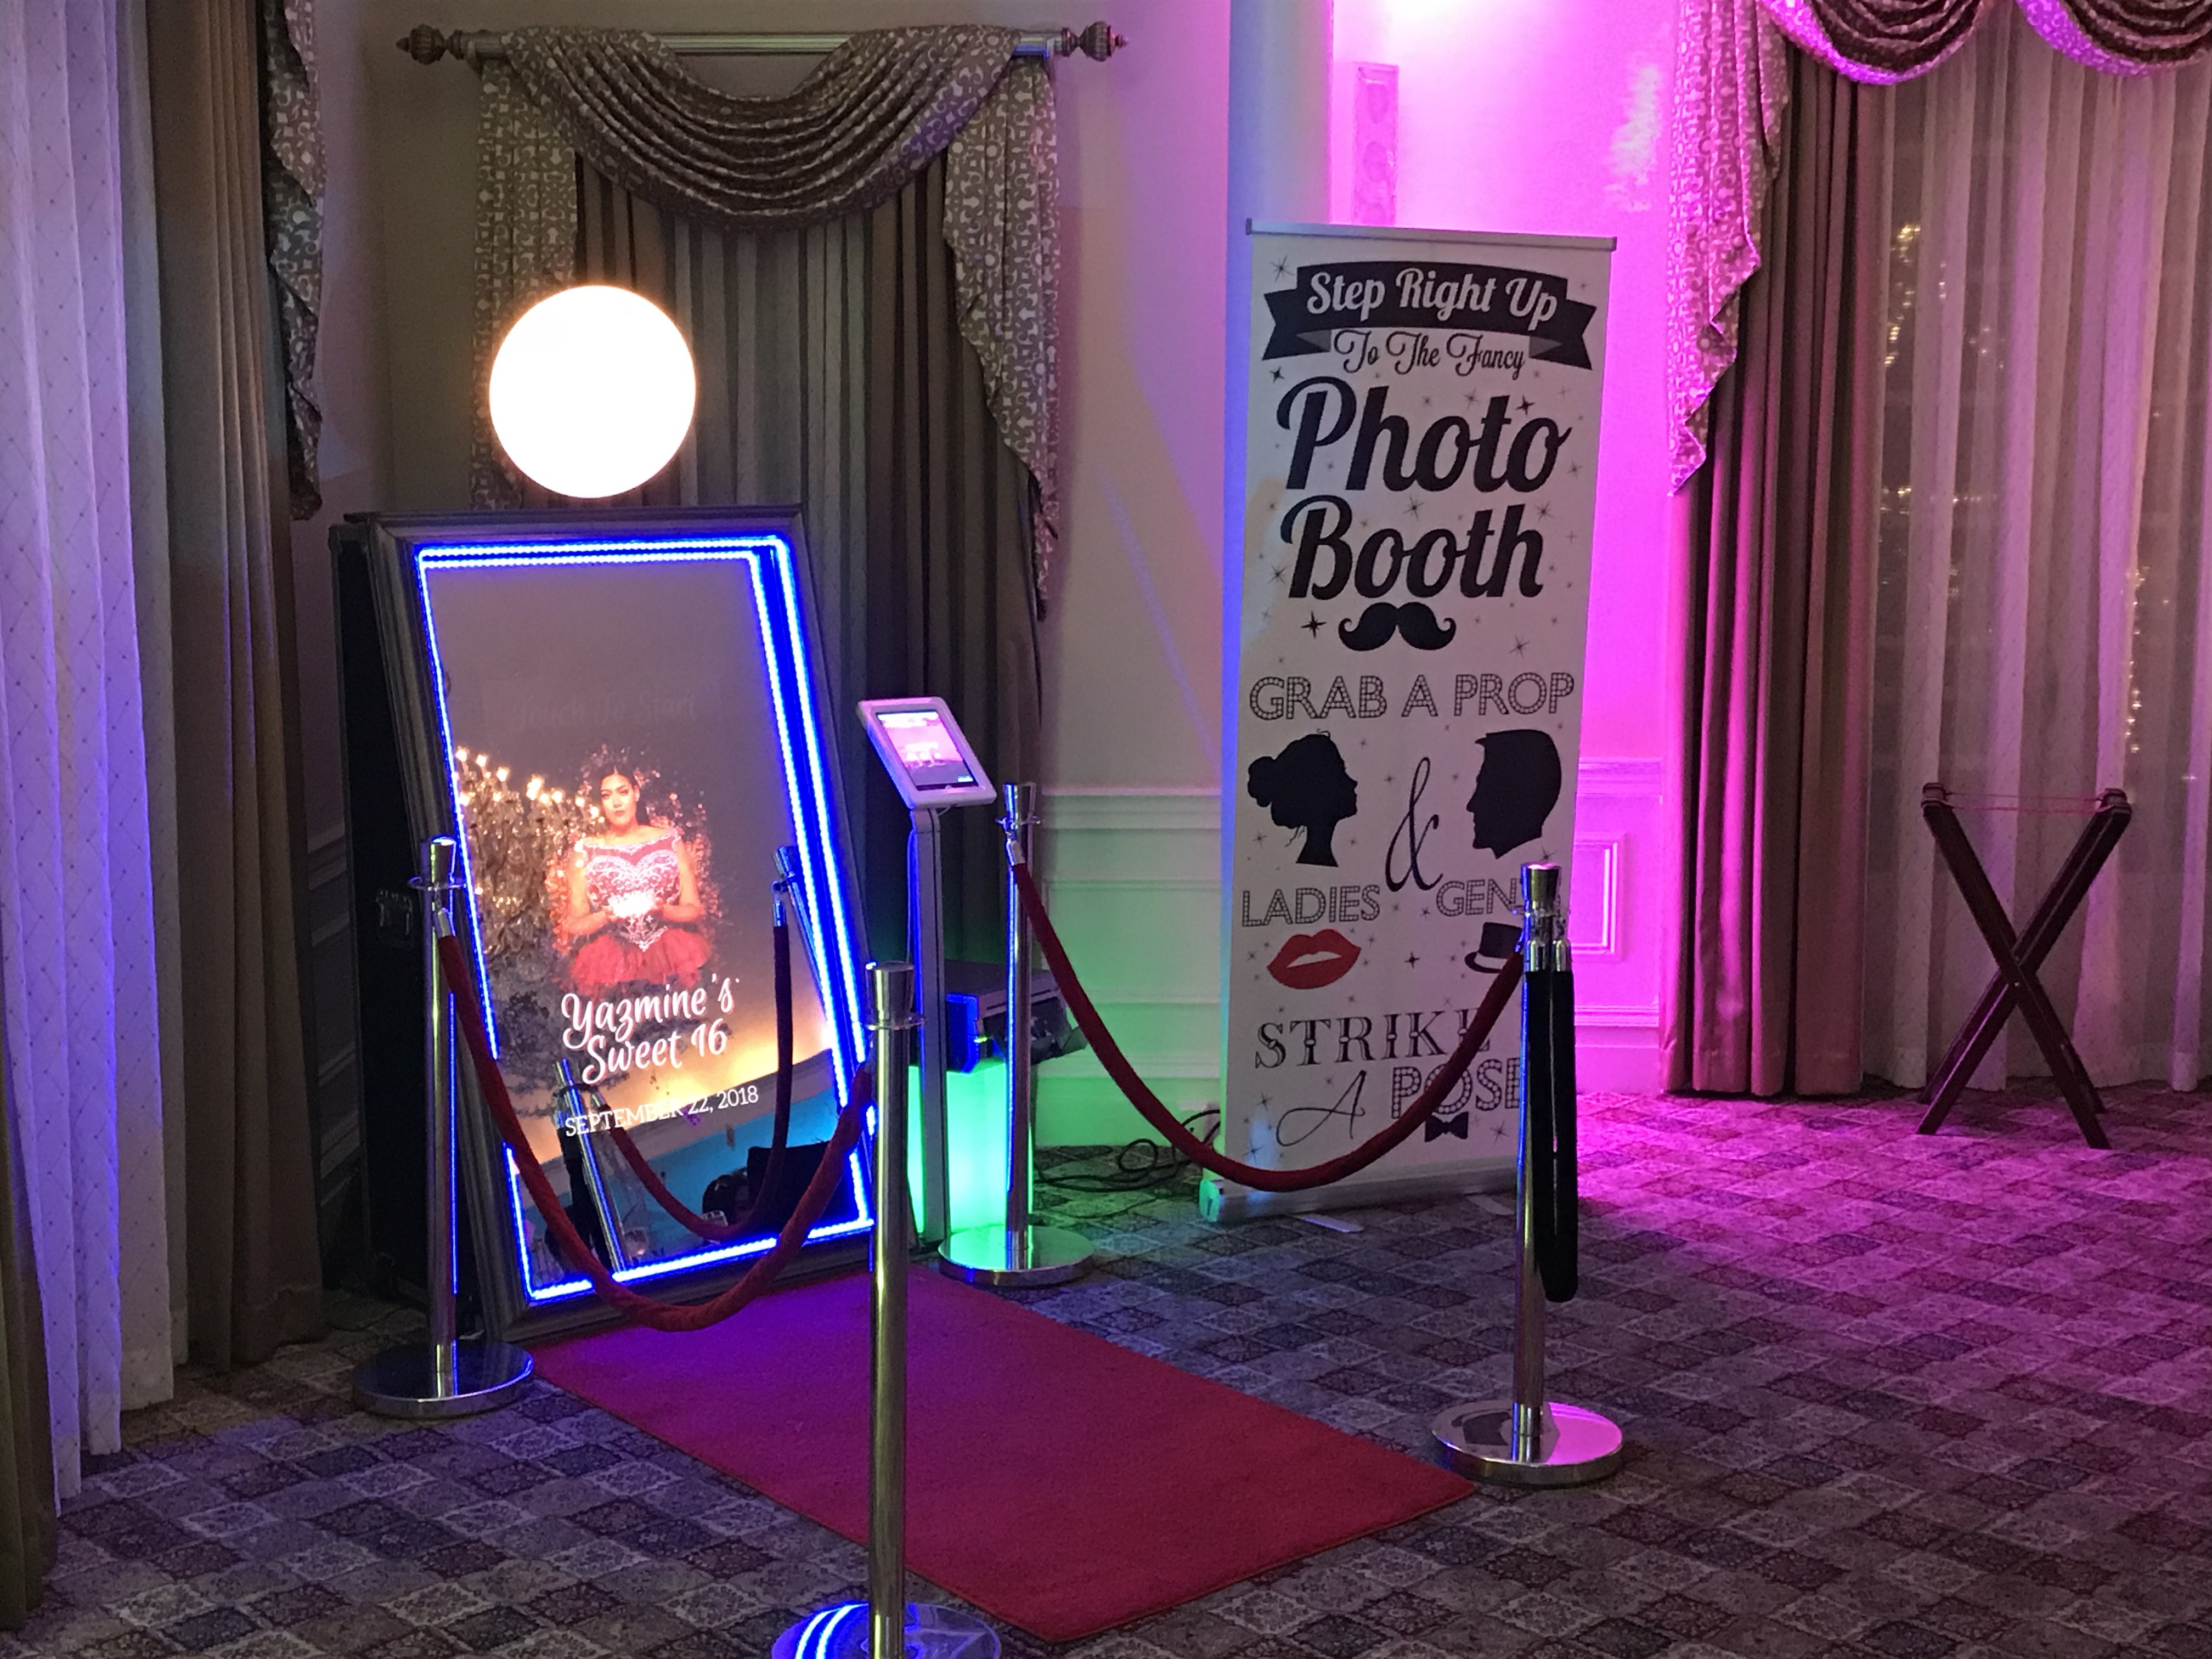 Magic Mirror Photo Booth Touch Interactive Selfie Photo Booth In